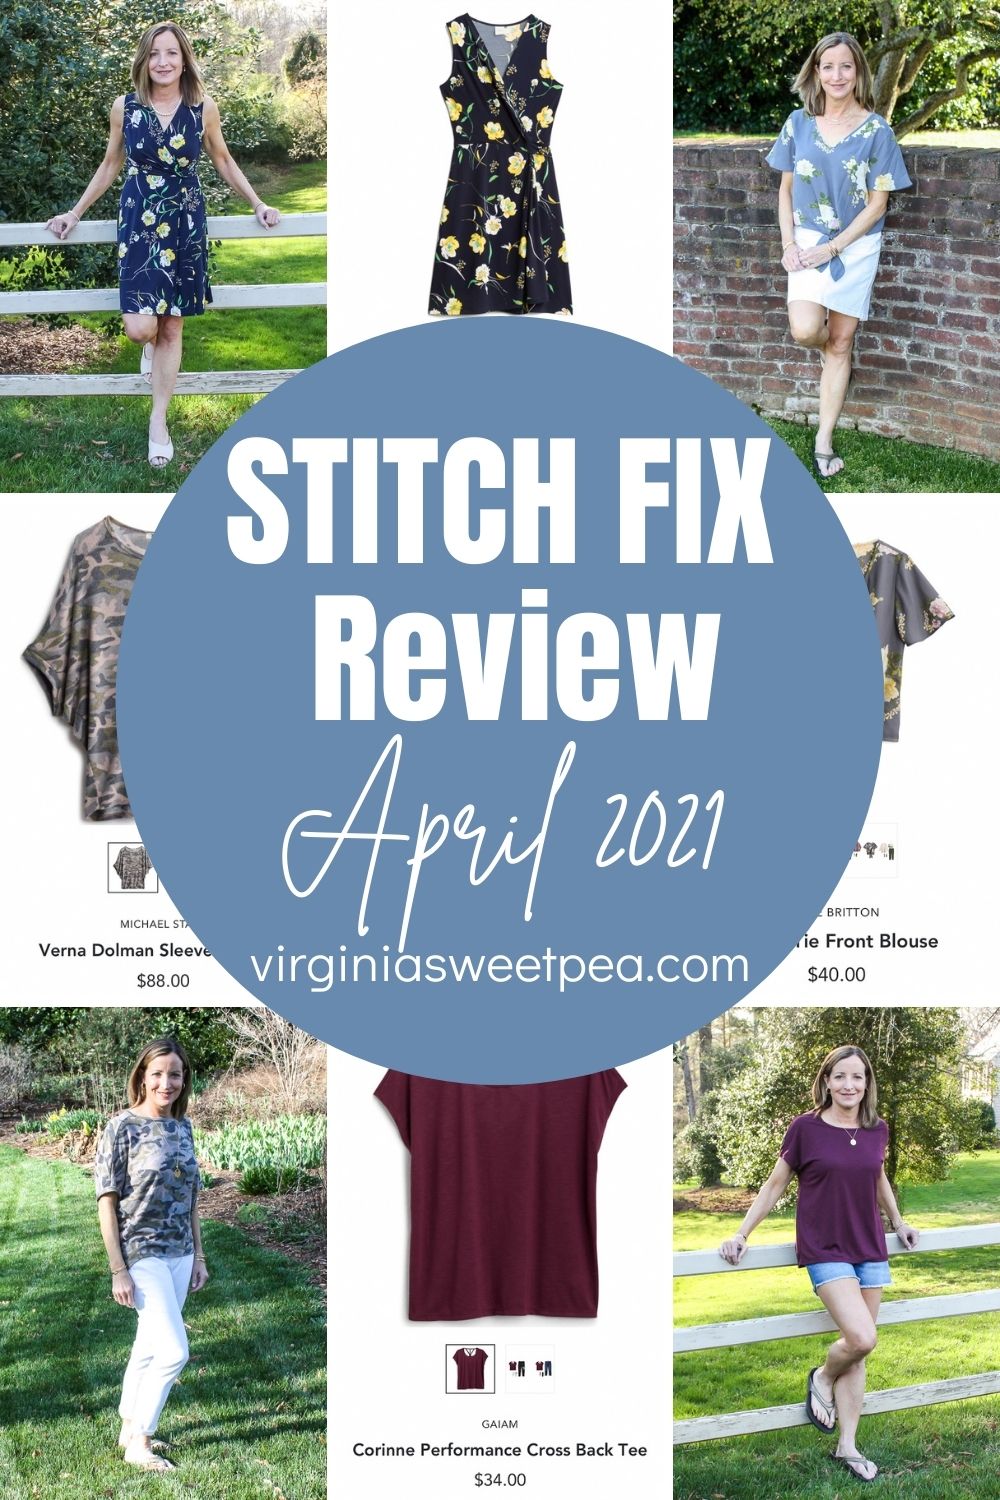 Stitch Fix Review: Know Before You Buy